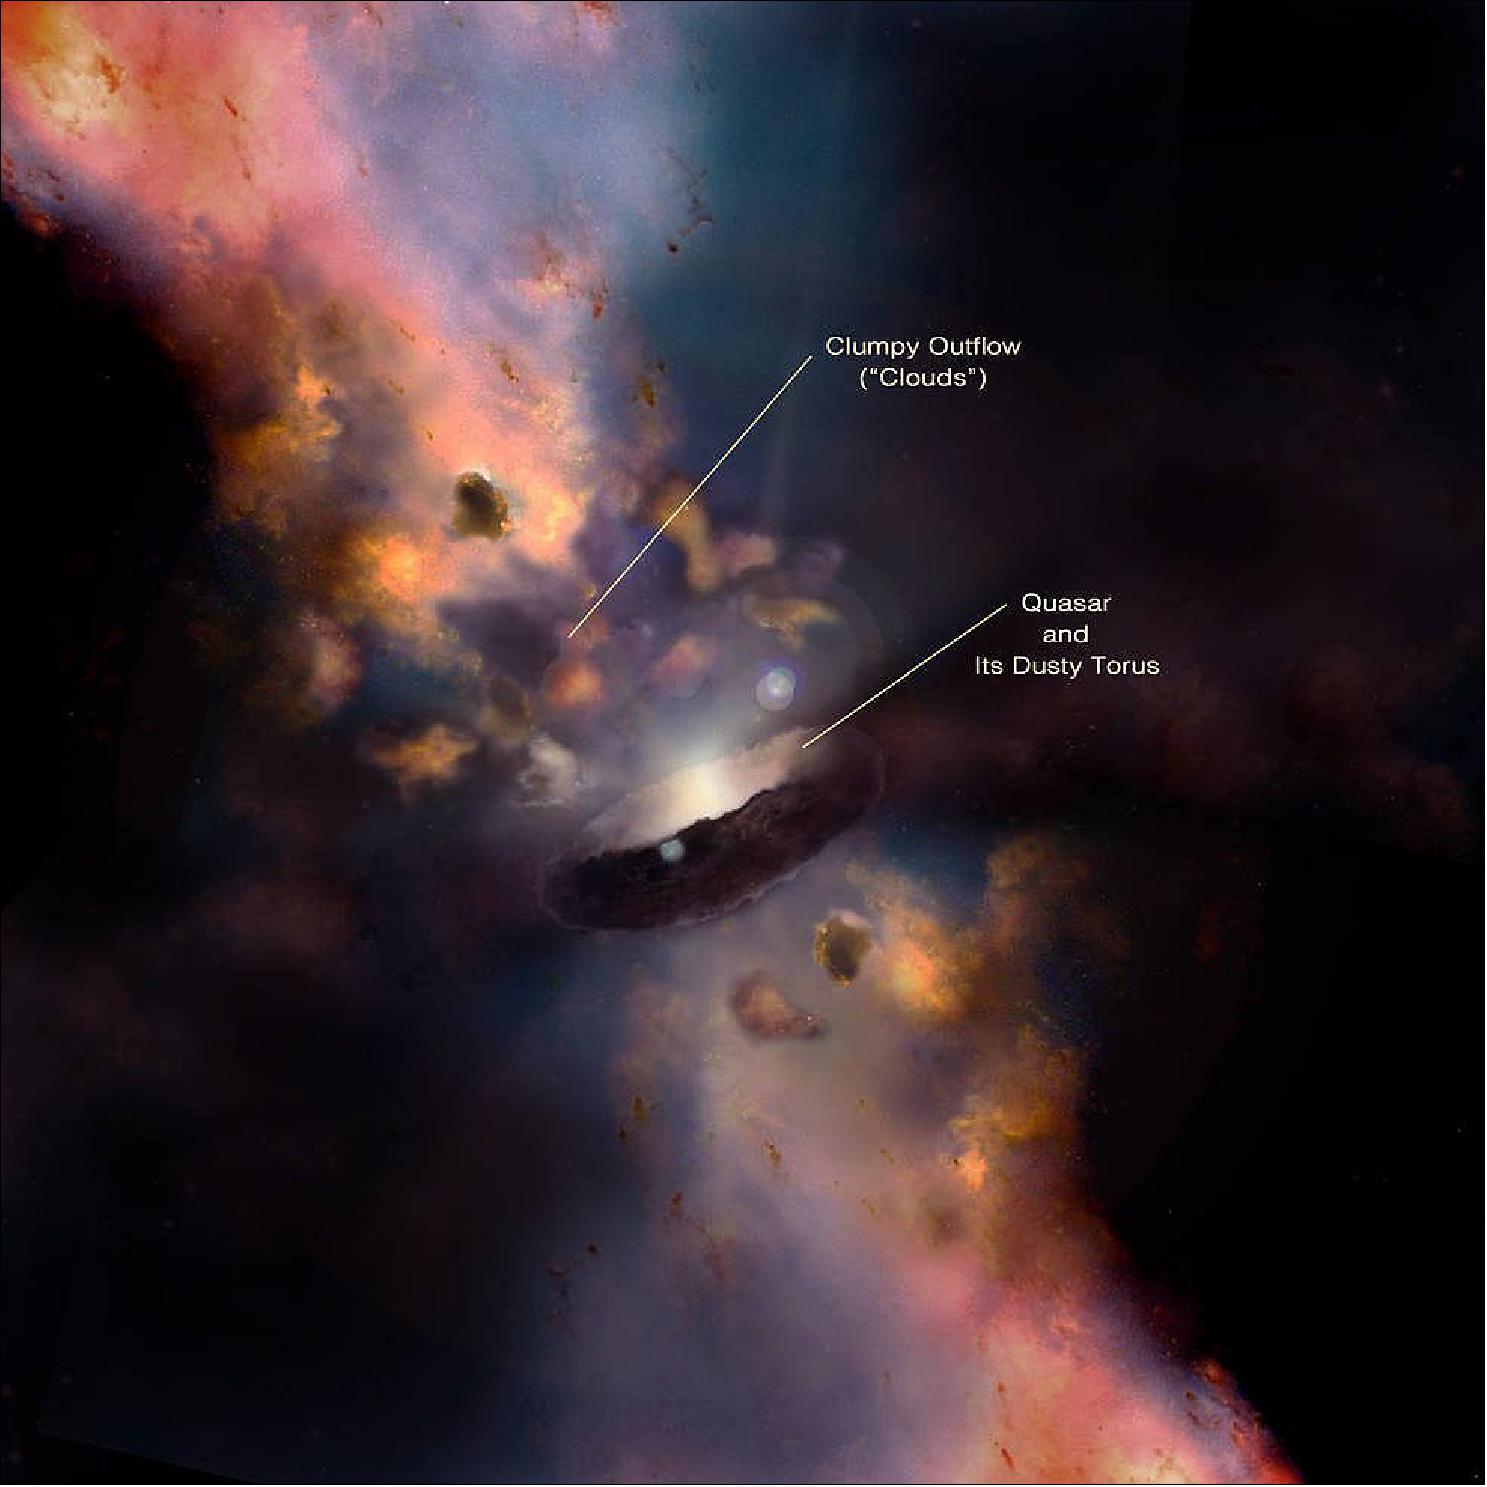 Figure 52: This illustration depicts a quasar, a type of active galactic nucleus, surrounded by a dusty donut shape (torus) and clumps called "clouds." These clouds start small but can expand to be more than 1 parsec (3.3 light-years) wide. In this diagram, the clouds are at least 1 parsec from the torus (image credit: Illustration by Nima Abkenar)